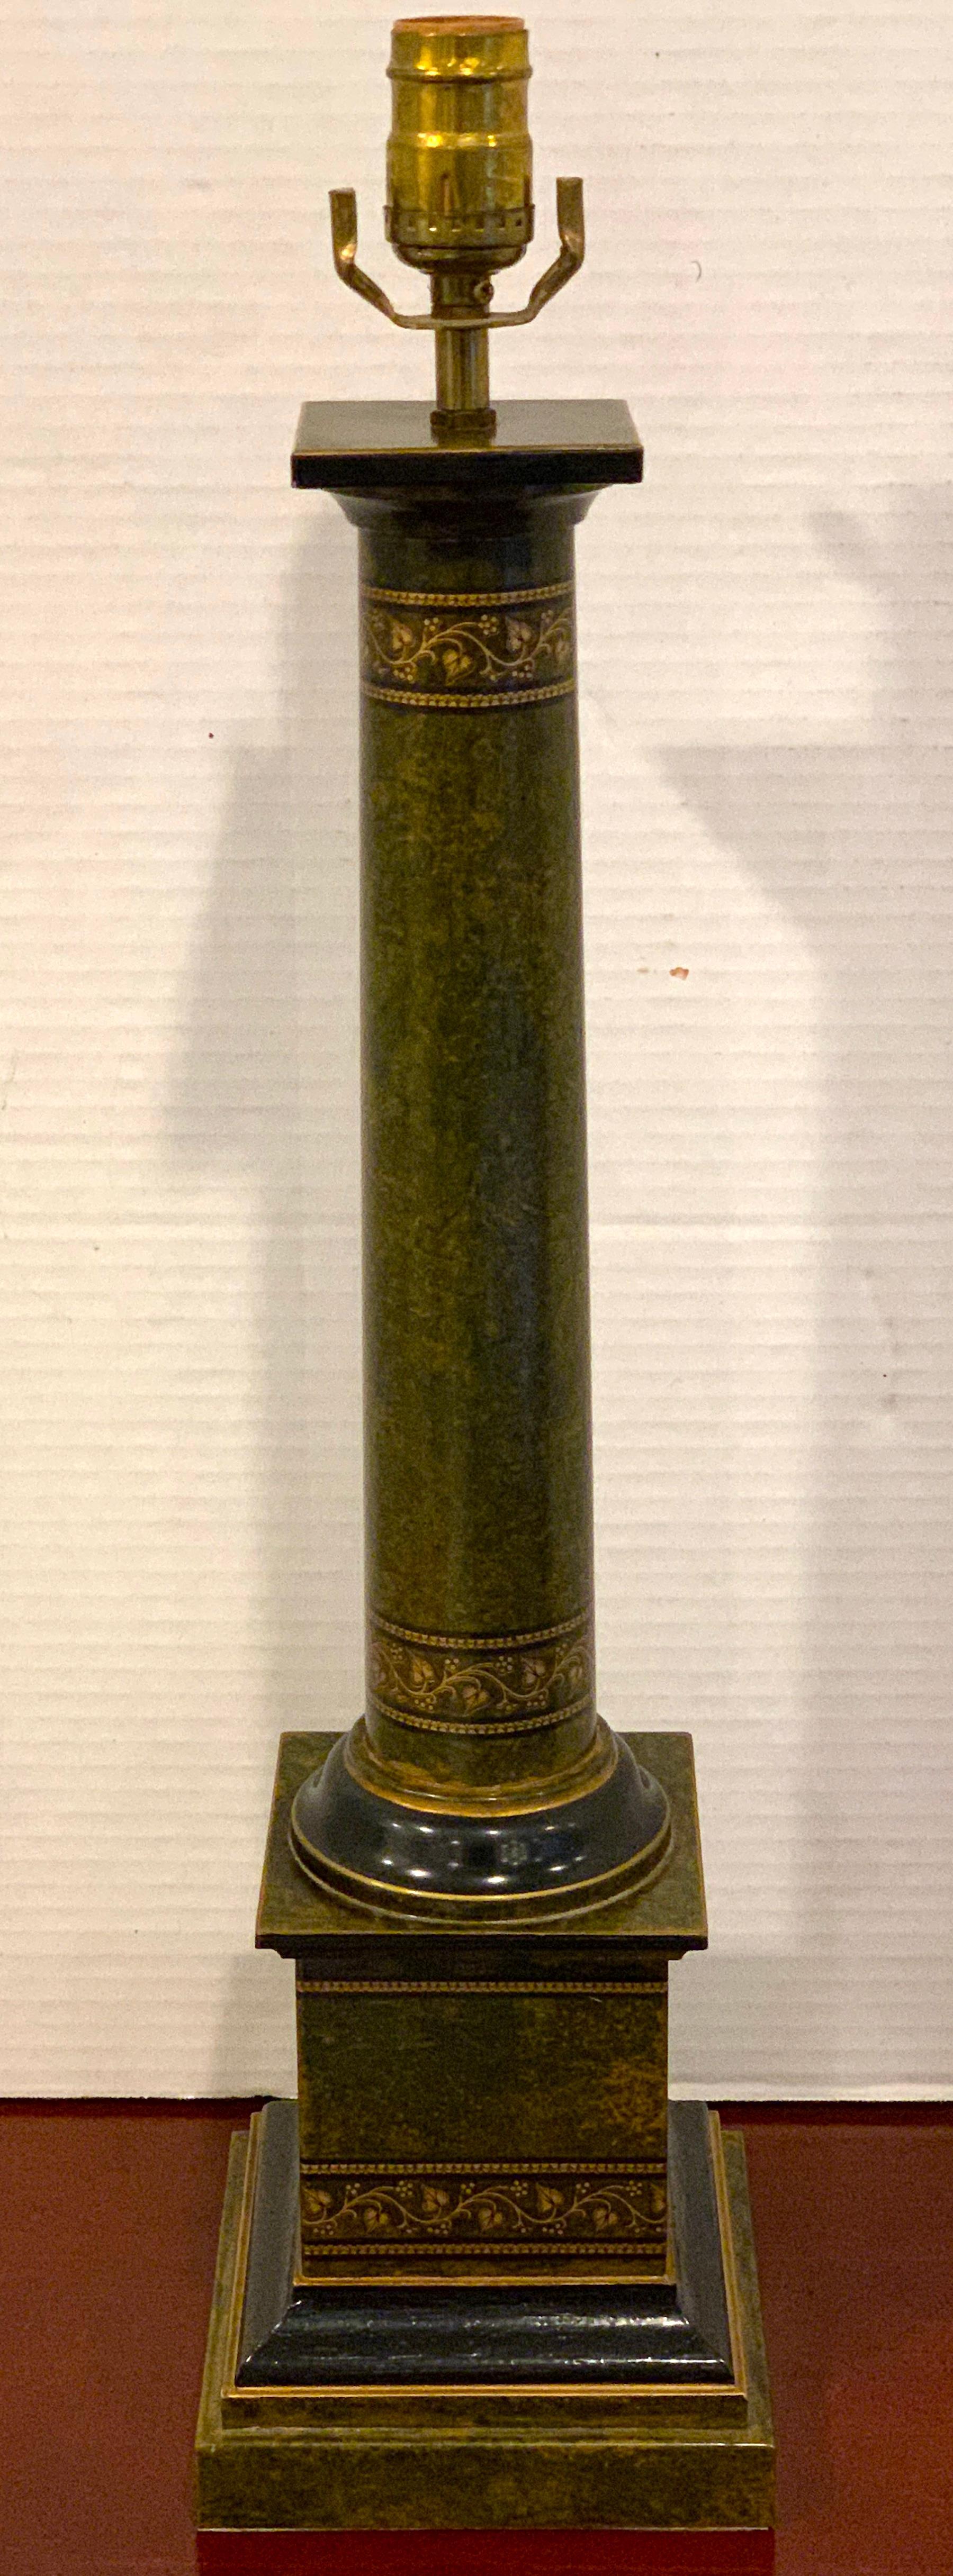 Regency style polychromed tole column lamp, subtly enameled, warm color, ready to place
Measures: 6